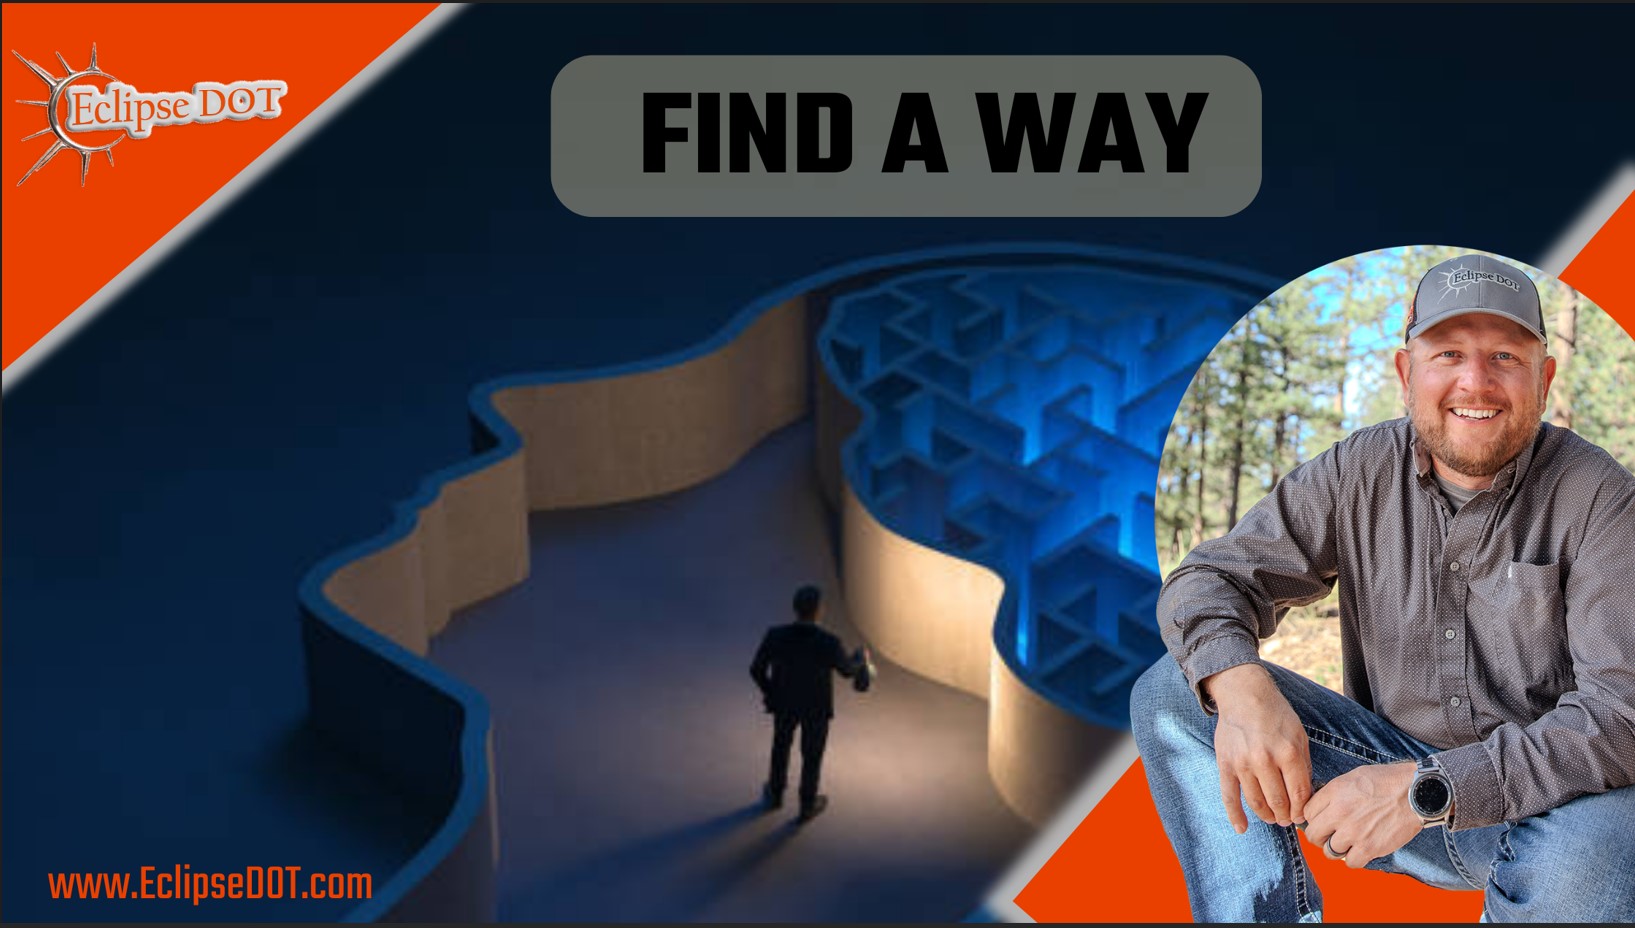 An inspiring image with the text "Find a way."